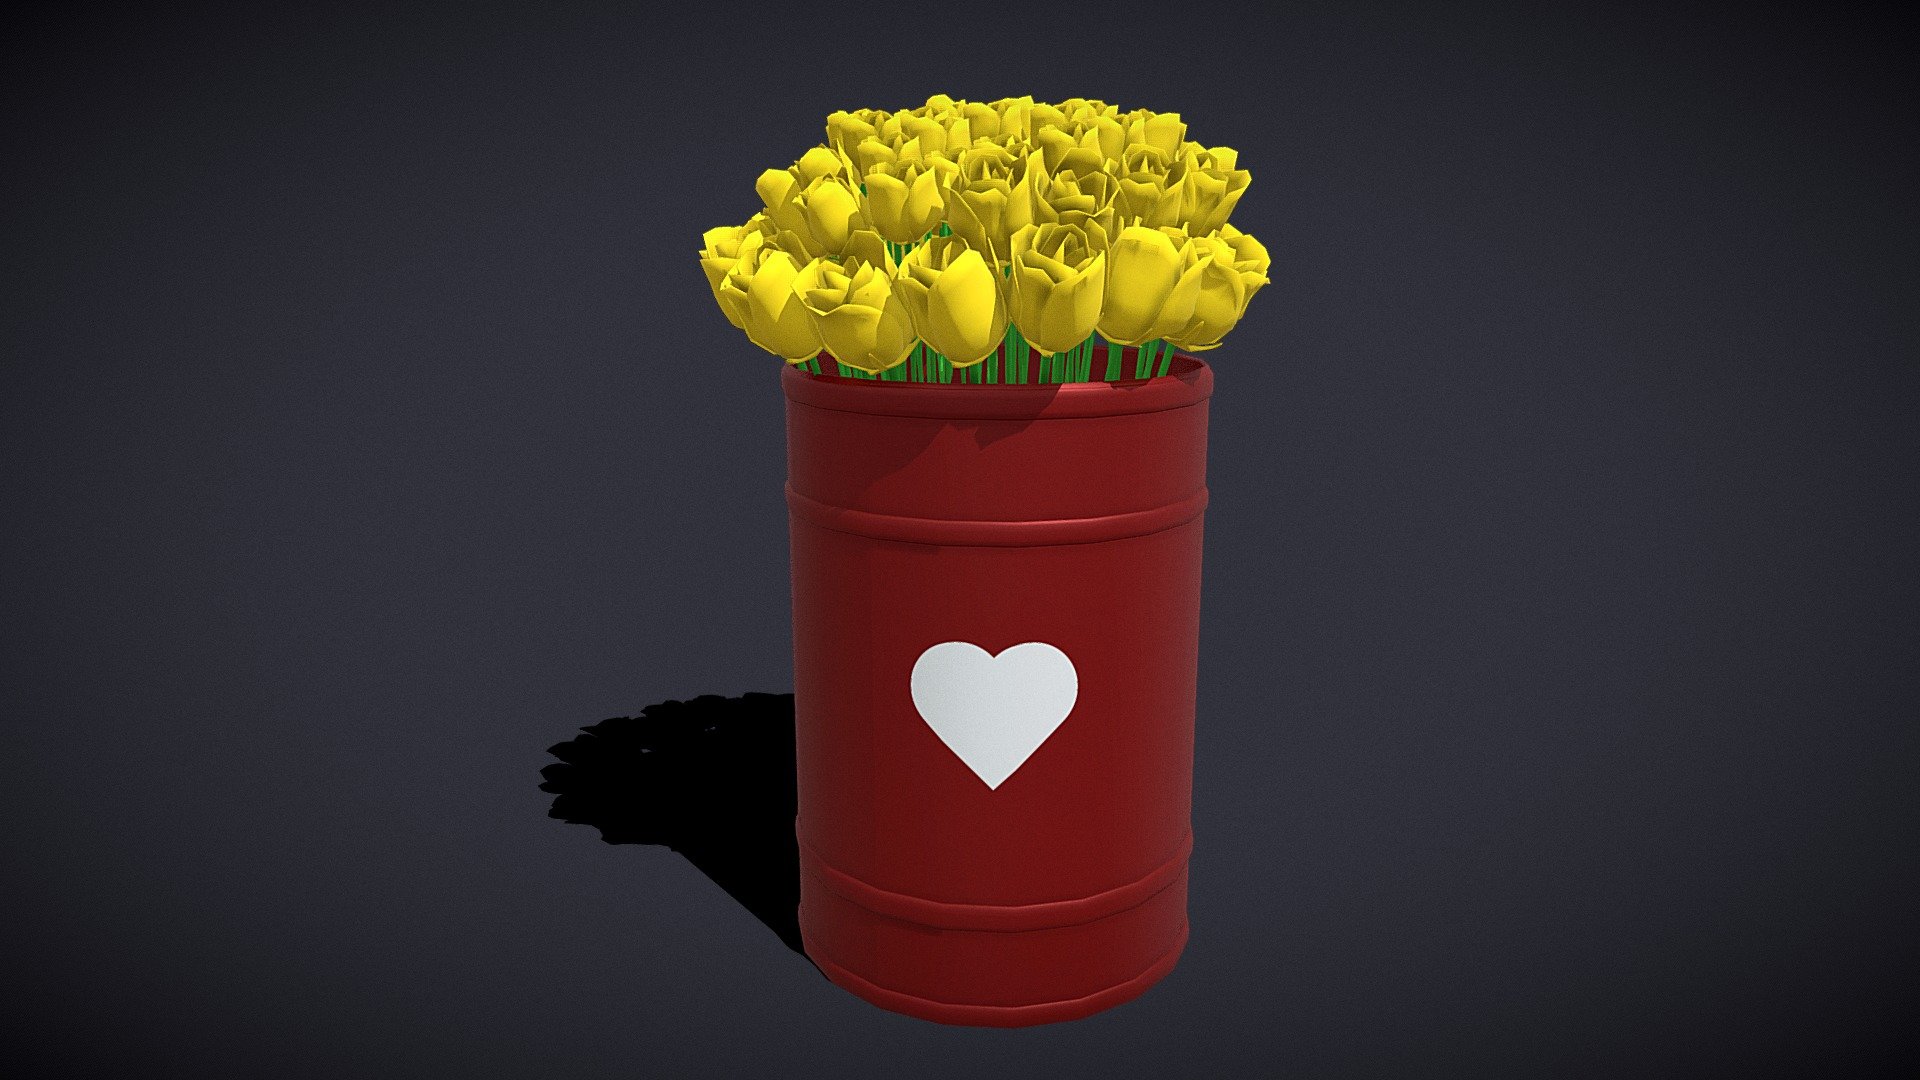 Yellow Roses Tin 
VR / AR / Low-poly
PBR approved
Geometry Polygon mesh
Polygons 117,419
Vertices 76,766
Textures 4K
Materials 1 - Yellow Roses Tin - Buy Royalty Free 3D model by GetDeadEntertainment 3d model